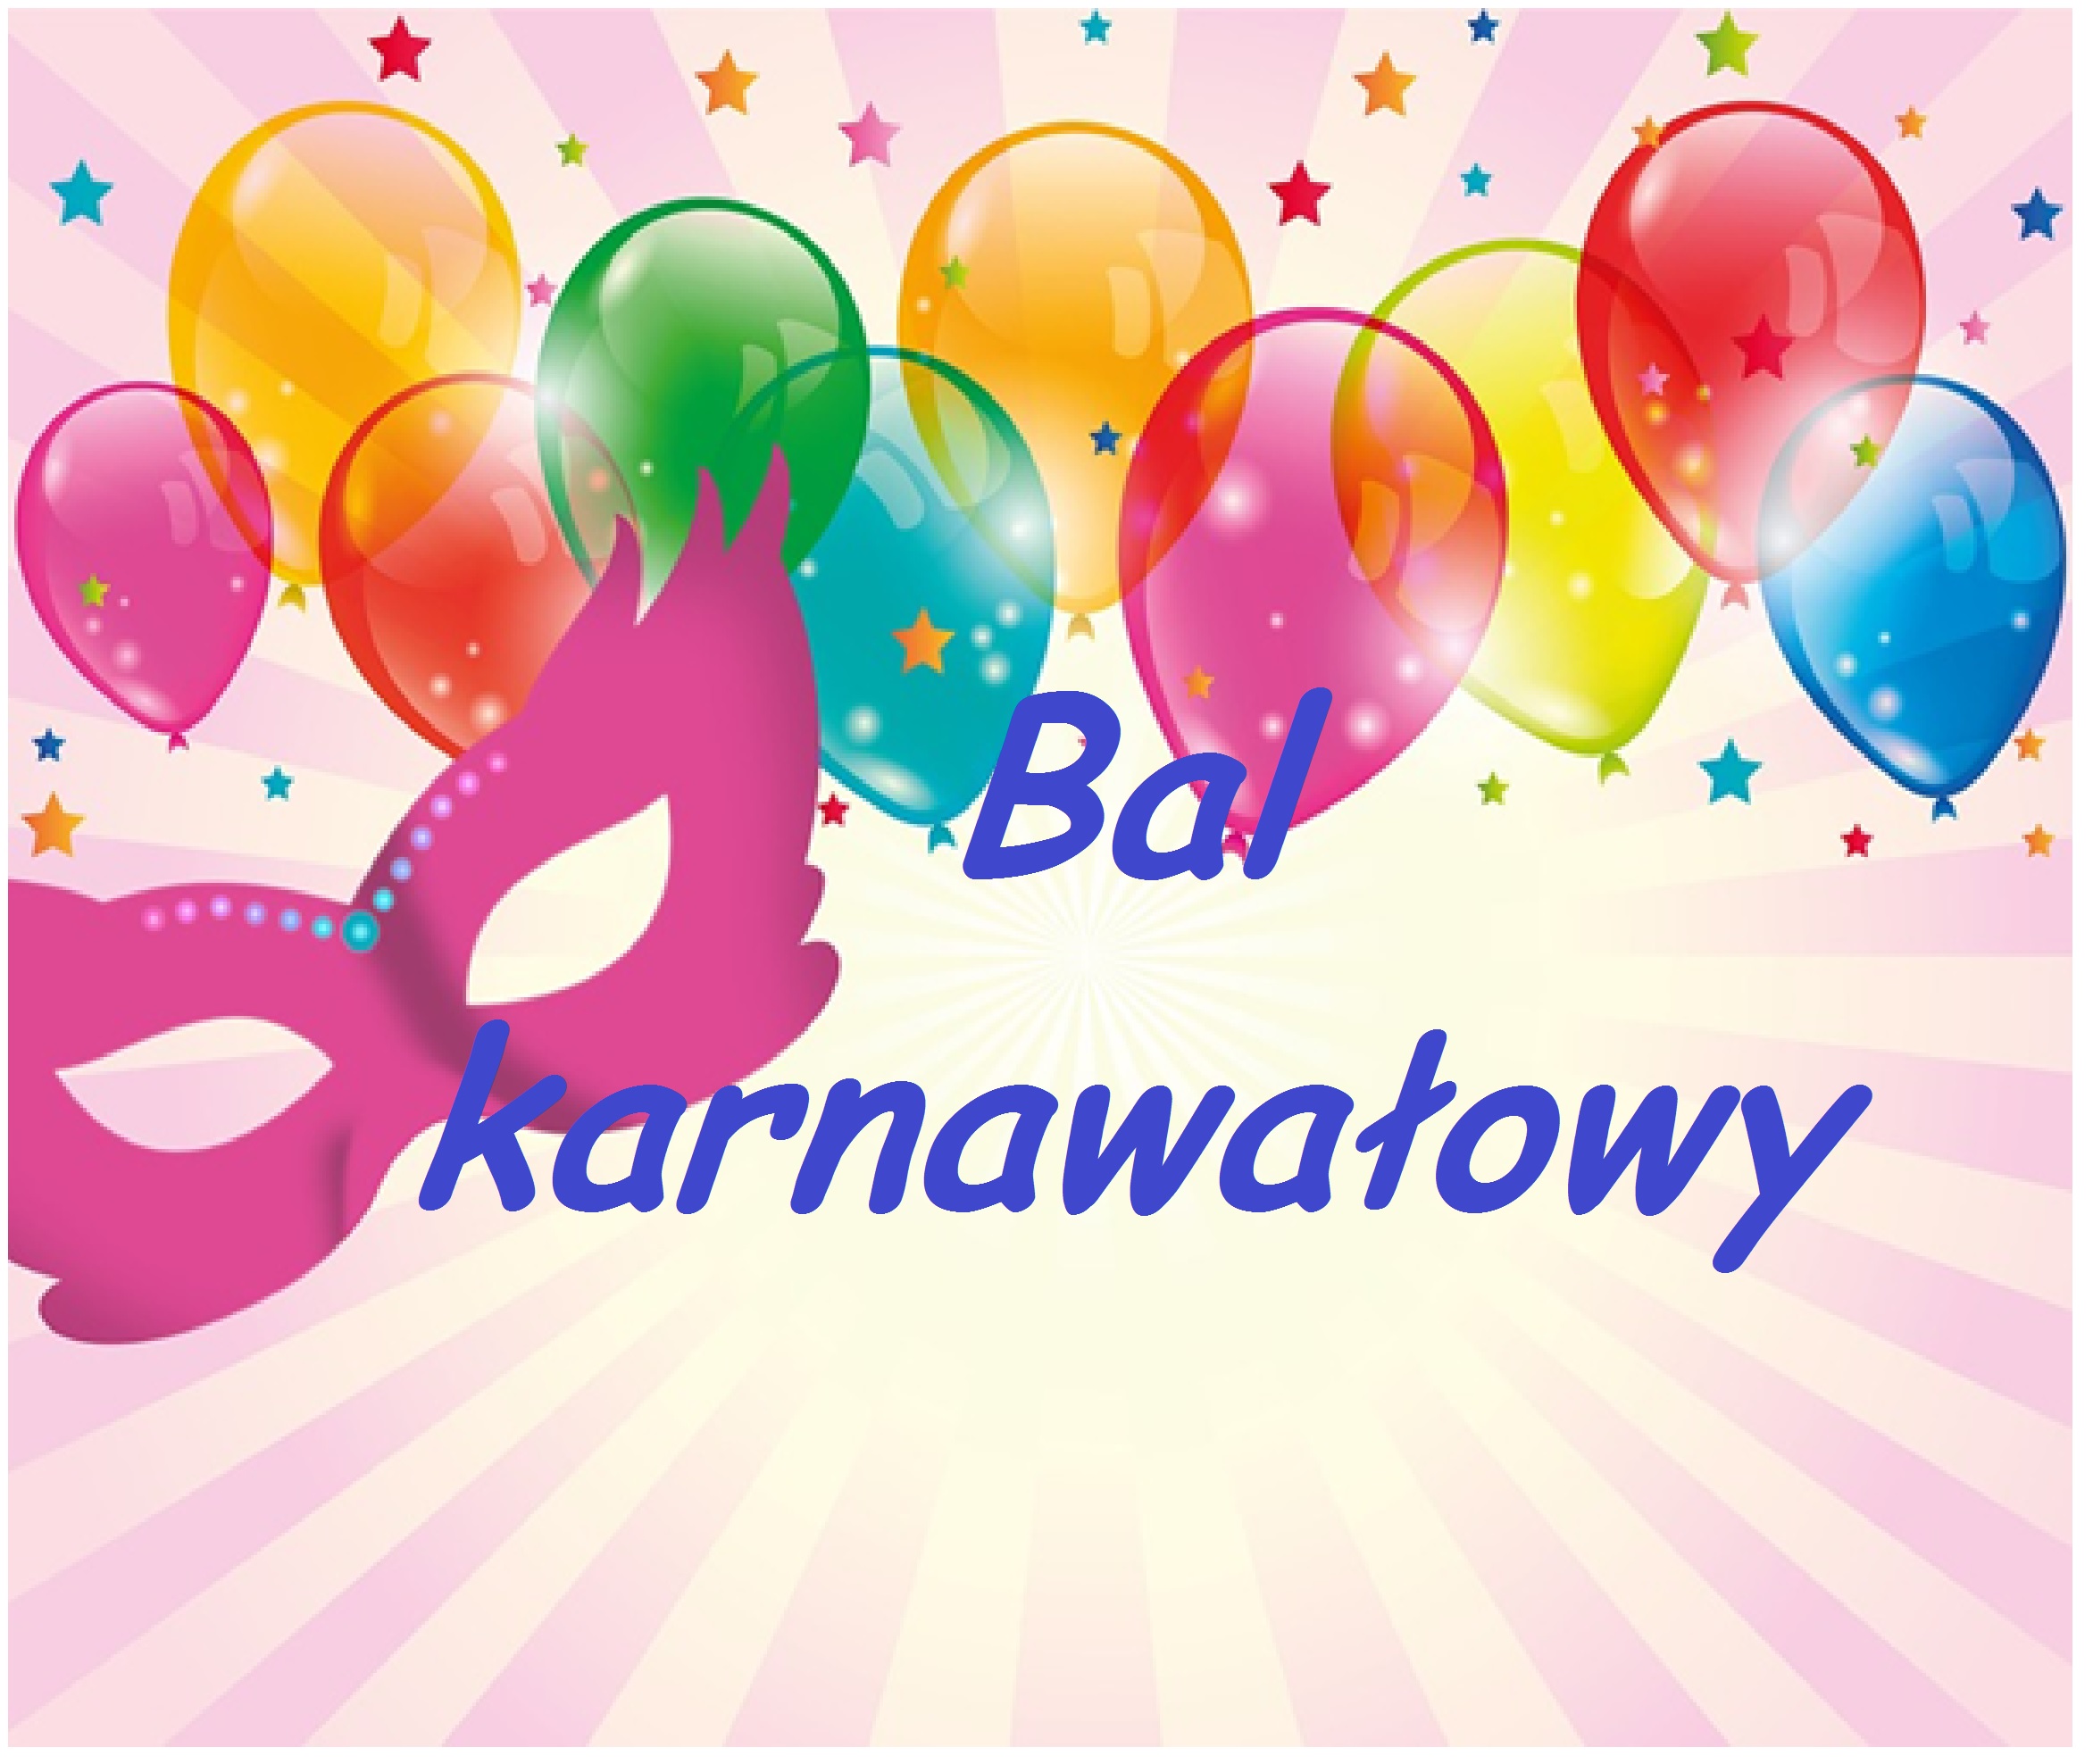 You are currently viewing Bal karnawałowy